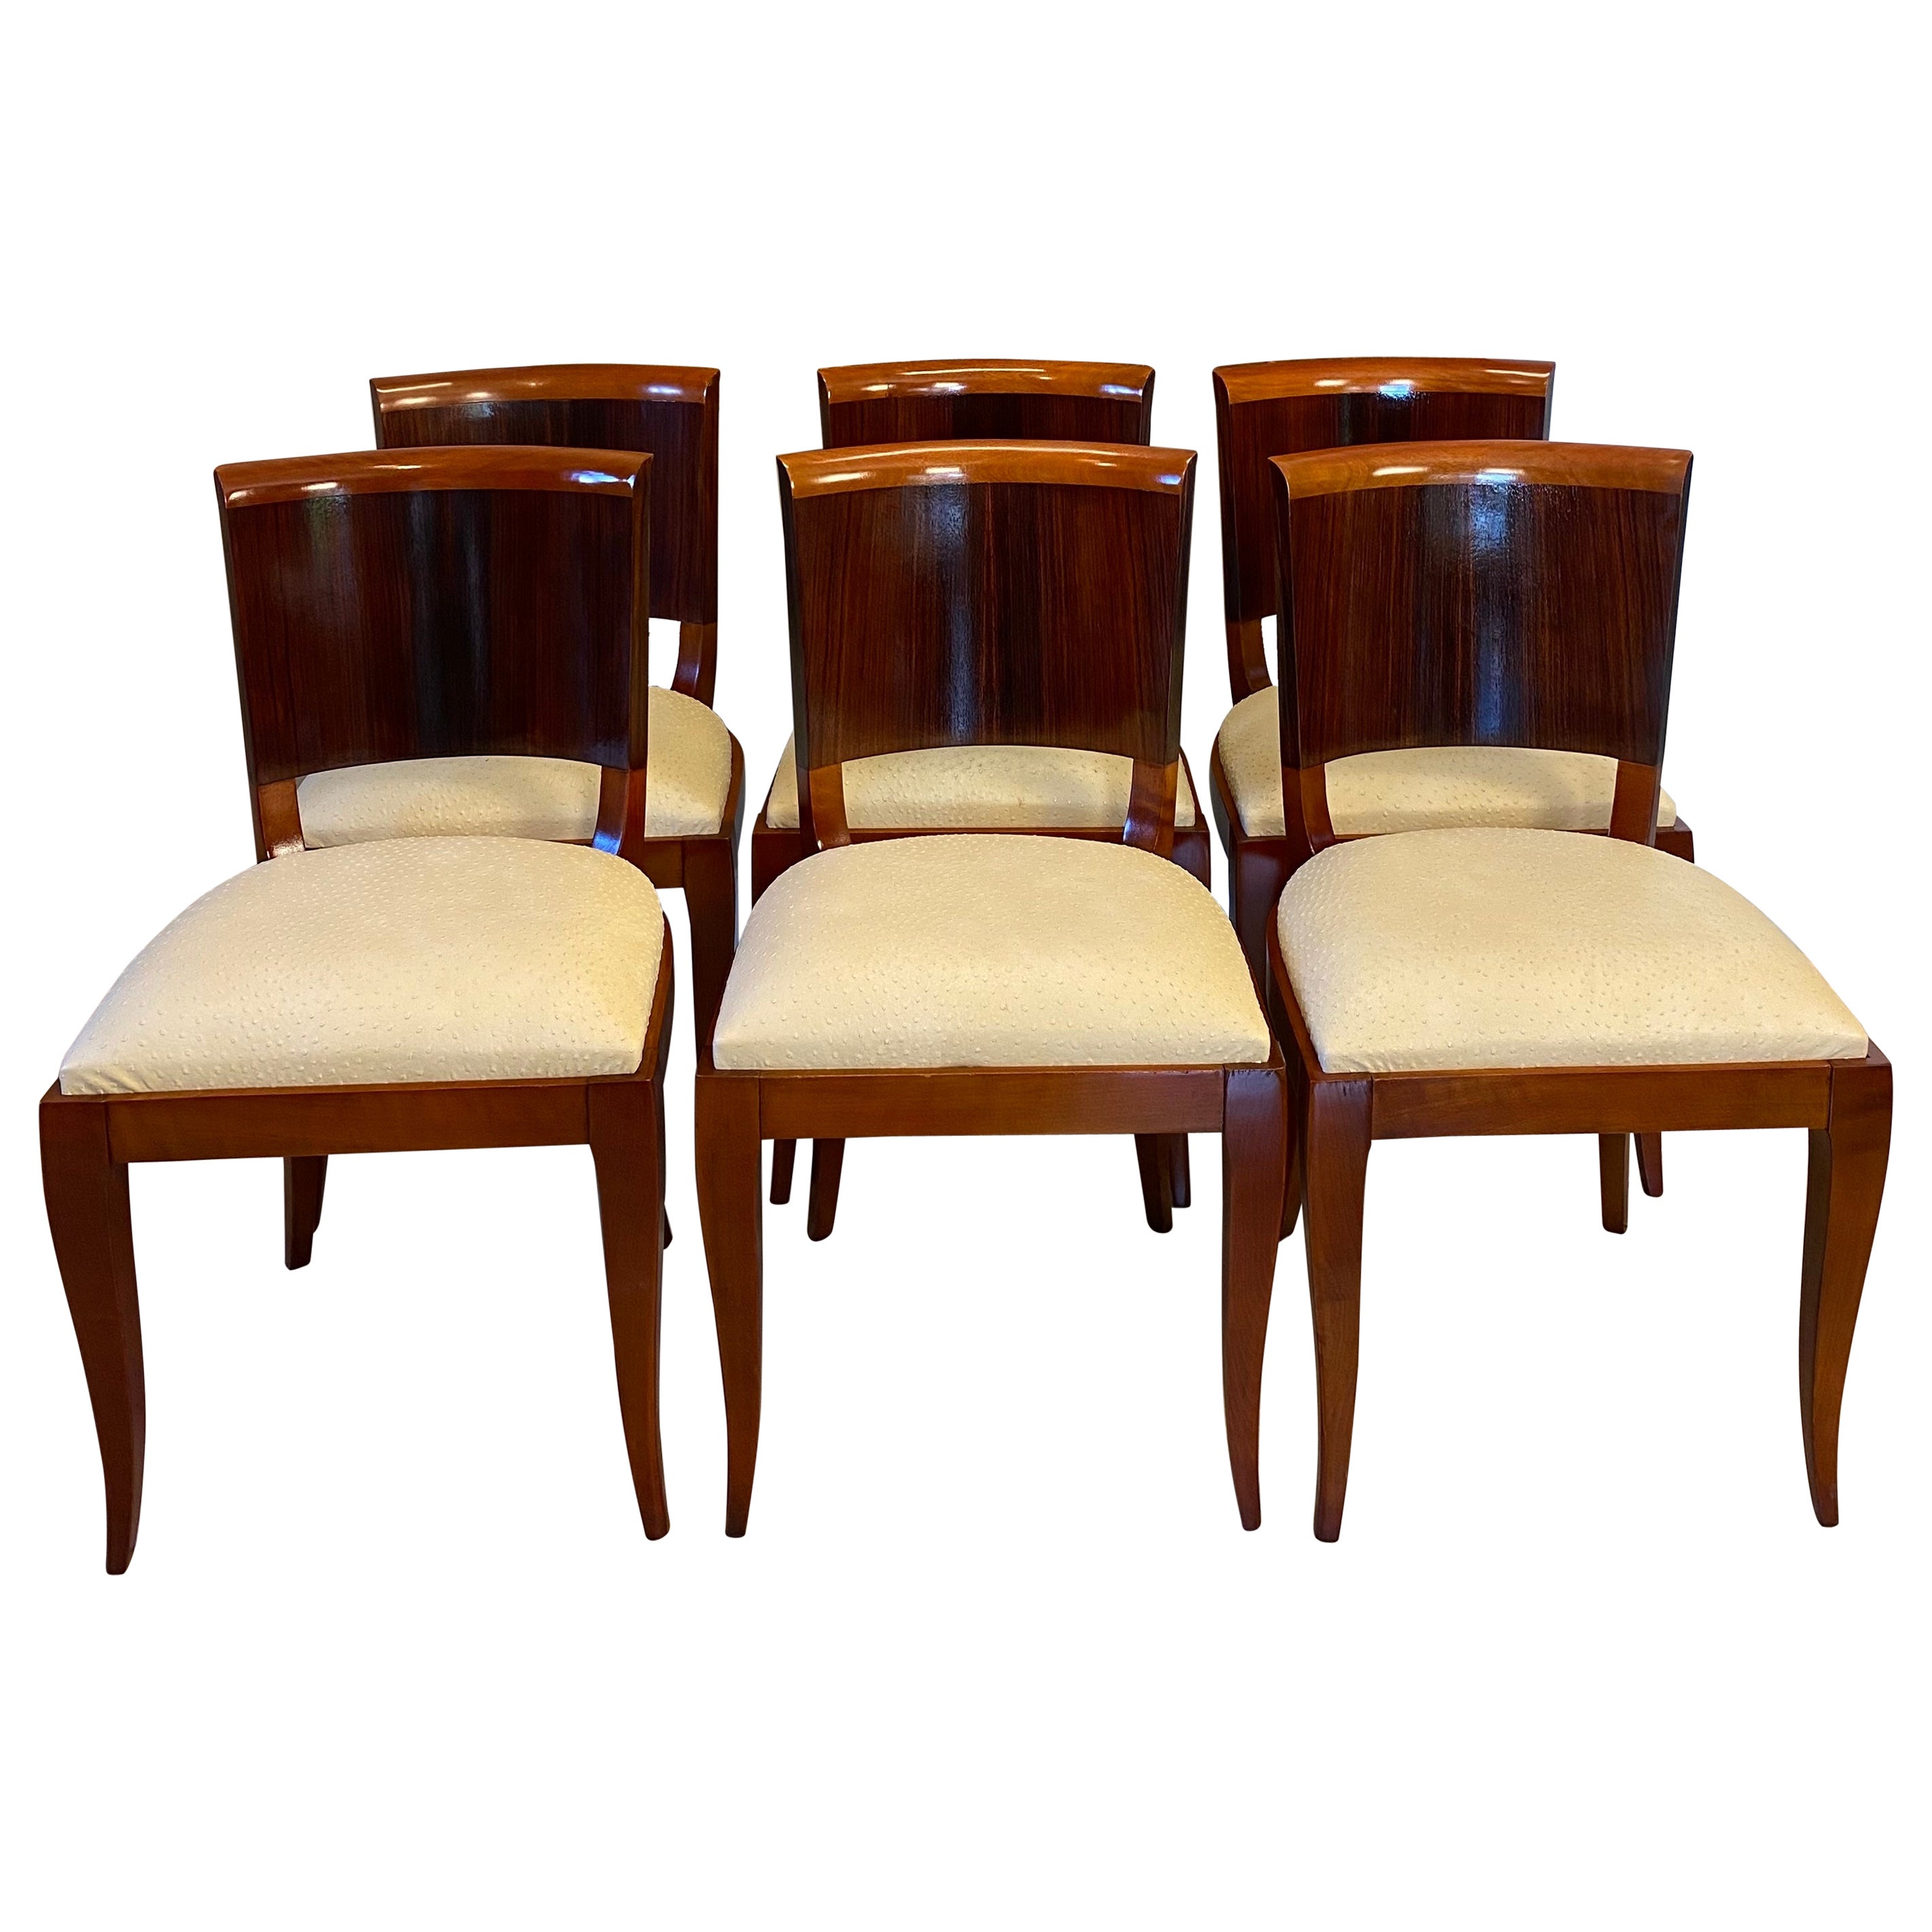 Set of 6 French Art Deco Dining Chairs, Refinished and Upholstered